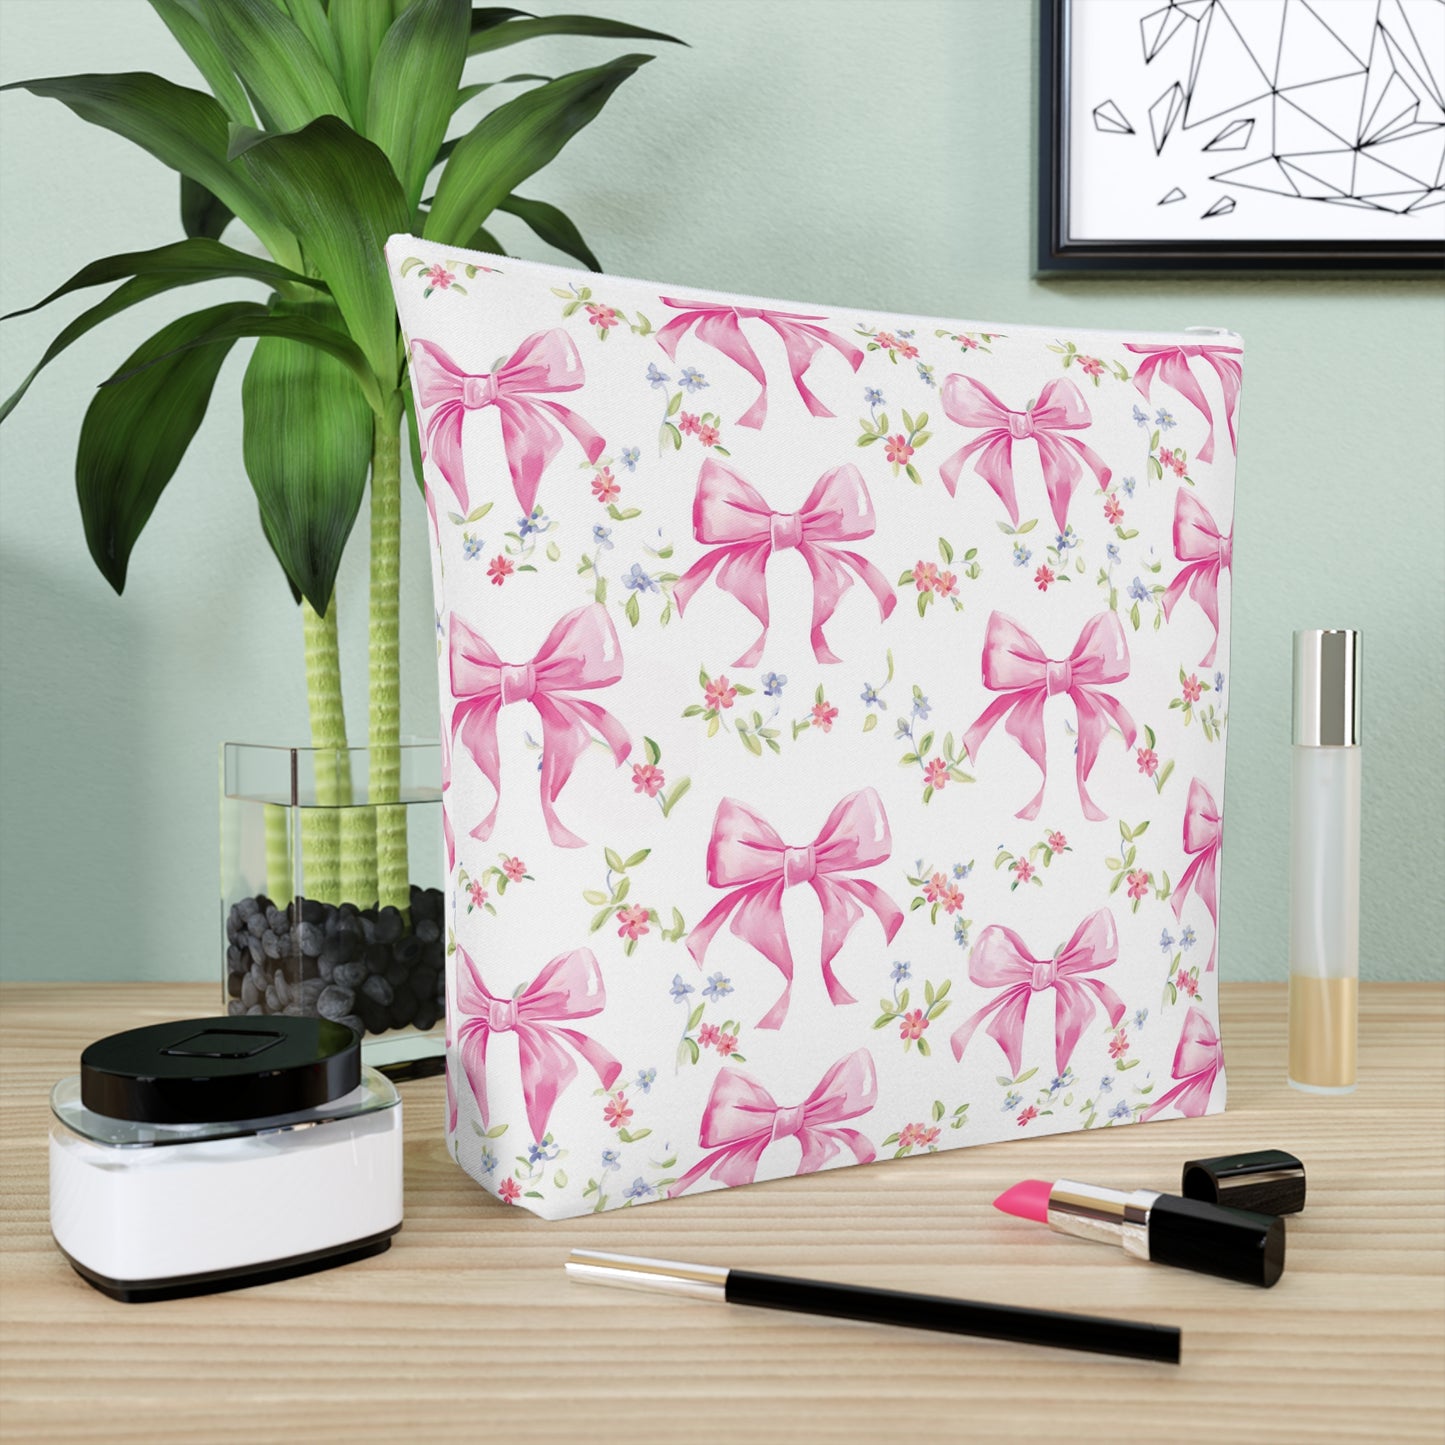 LP Pink Bow - Cotton Cosmetic Bag